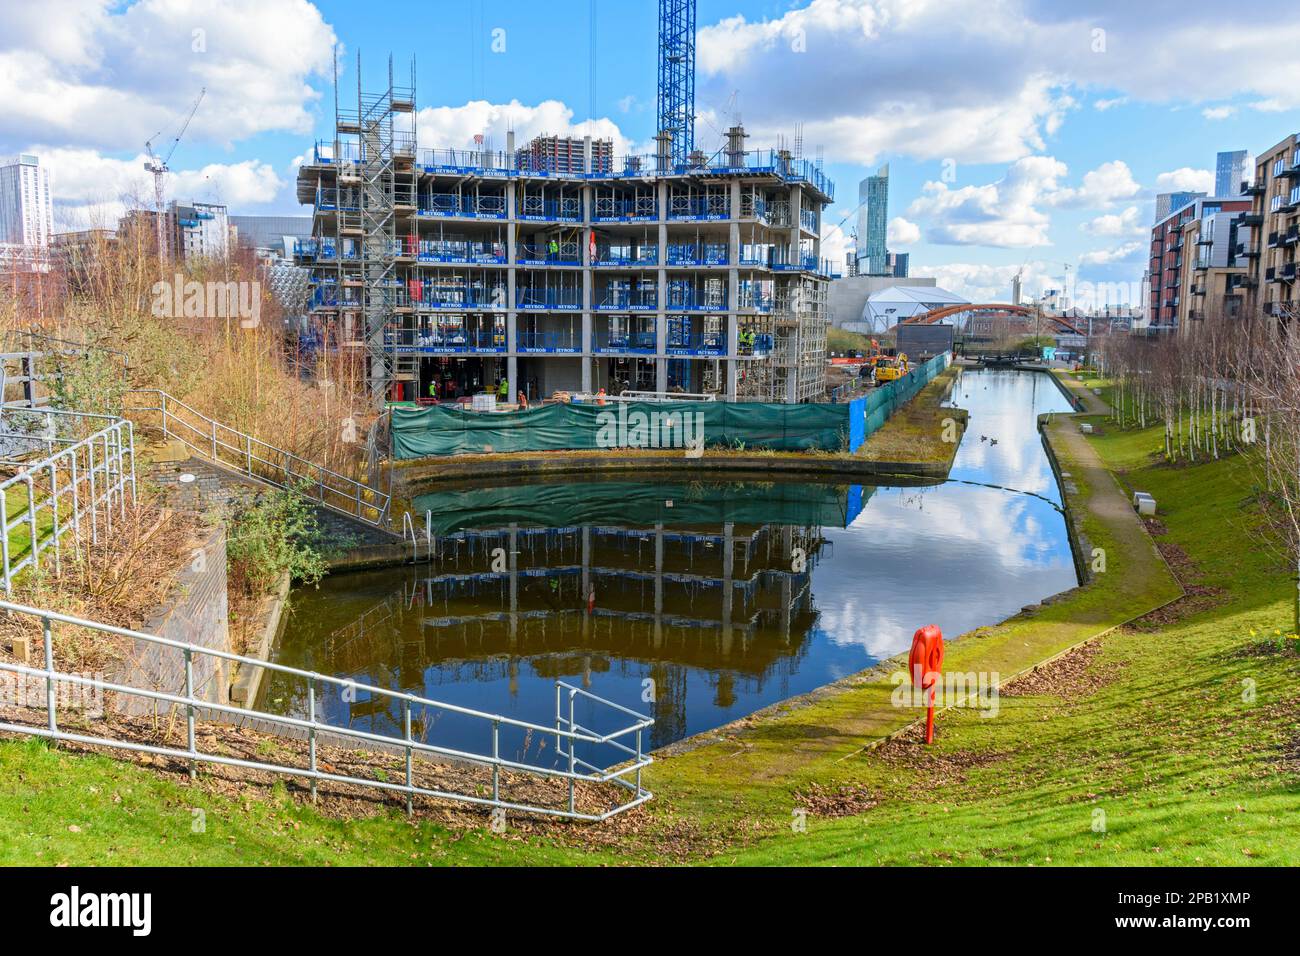 Apartments block under construction at the Middlewood Locks development, over the Manchester, Bolton and Bury Canal, Salford, Manchester, England, UK Stock Photo